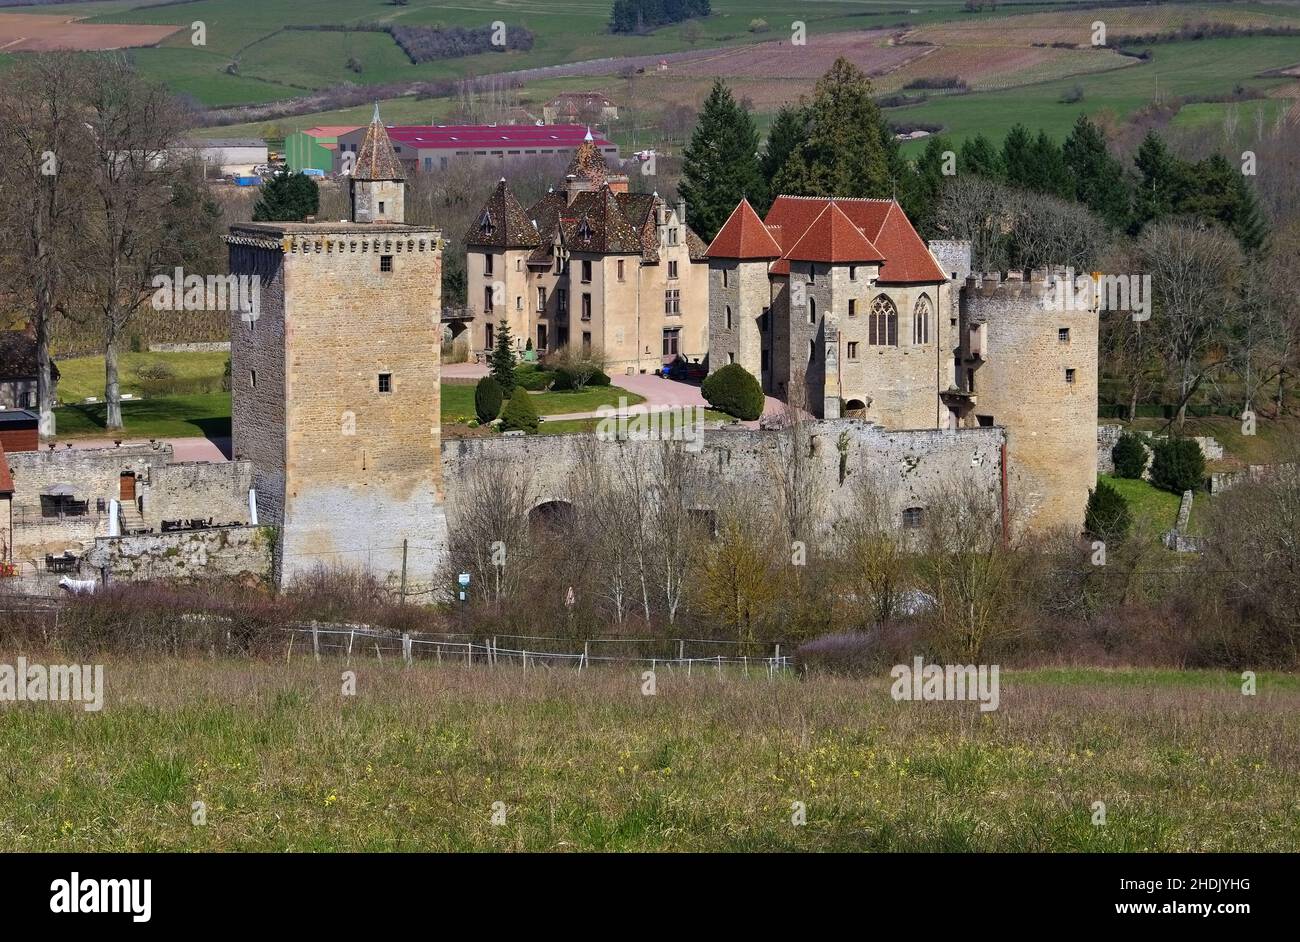 Chateau de Couches Burgundy France Stock Photo - Alamy